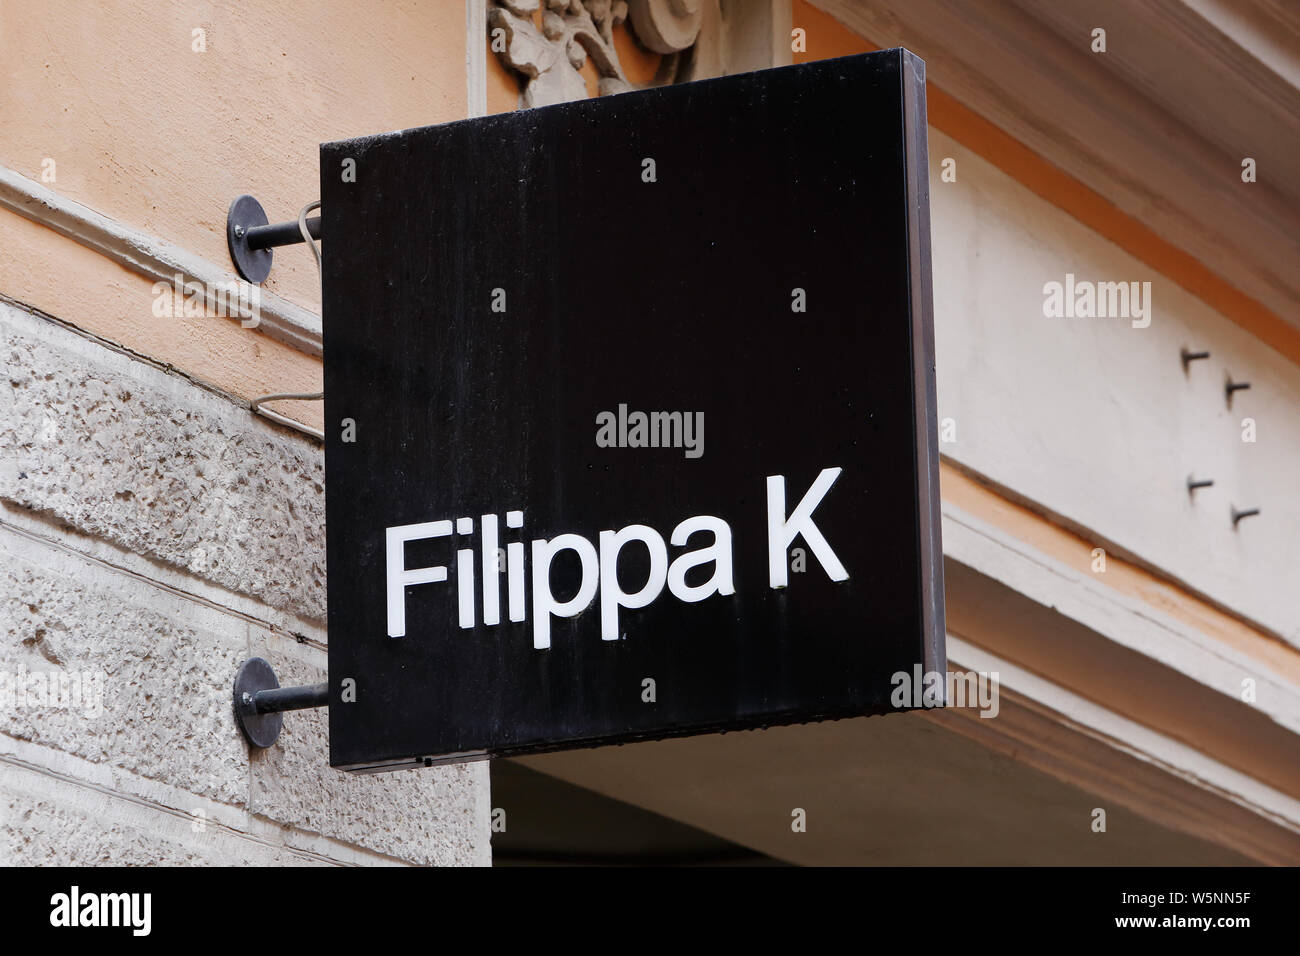 Stockhom, Sweden - April 30, 2019: The brand sign at the Filippa K clothing shop located at the Grev Turegatan street. Stock Photo